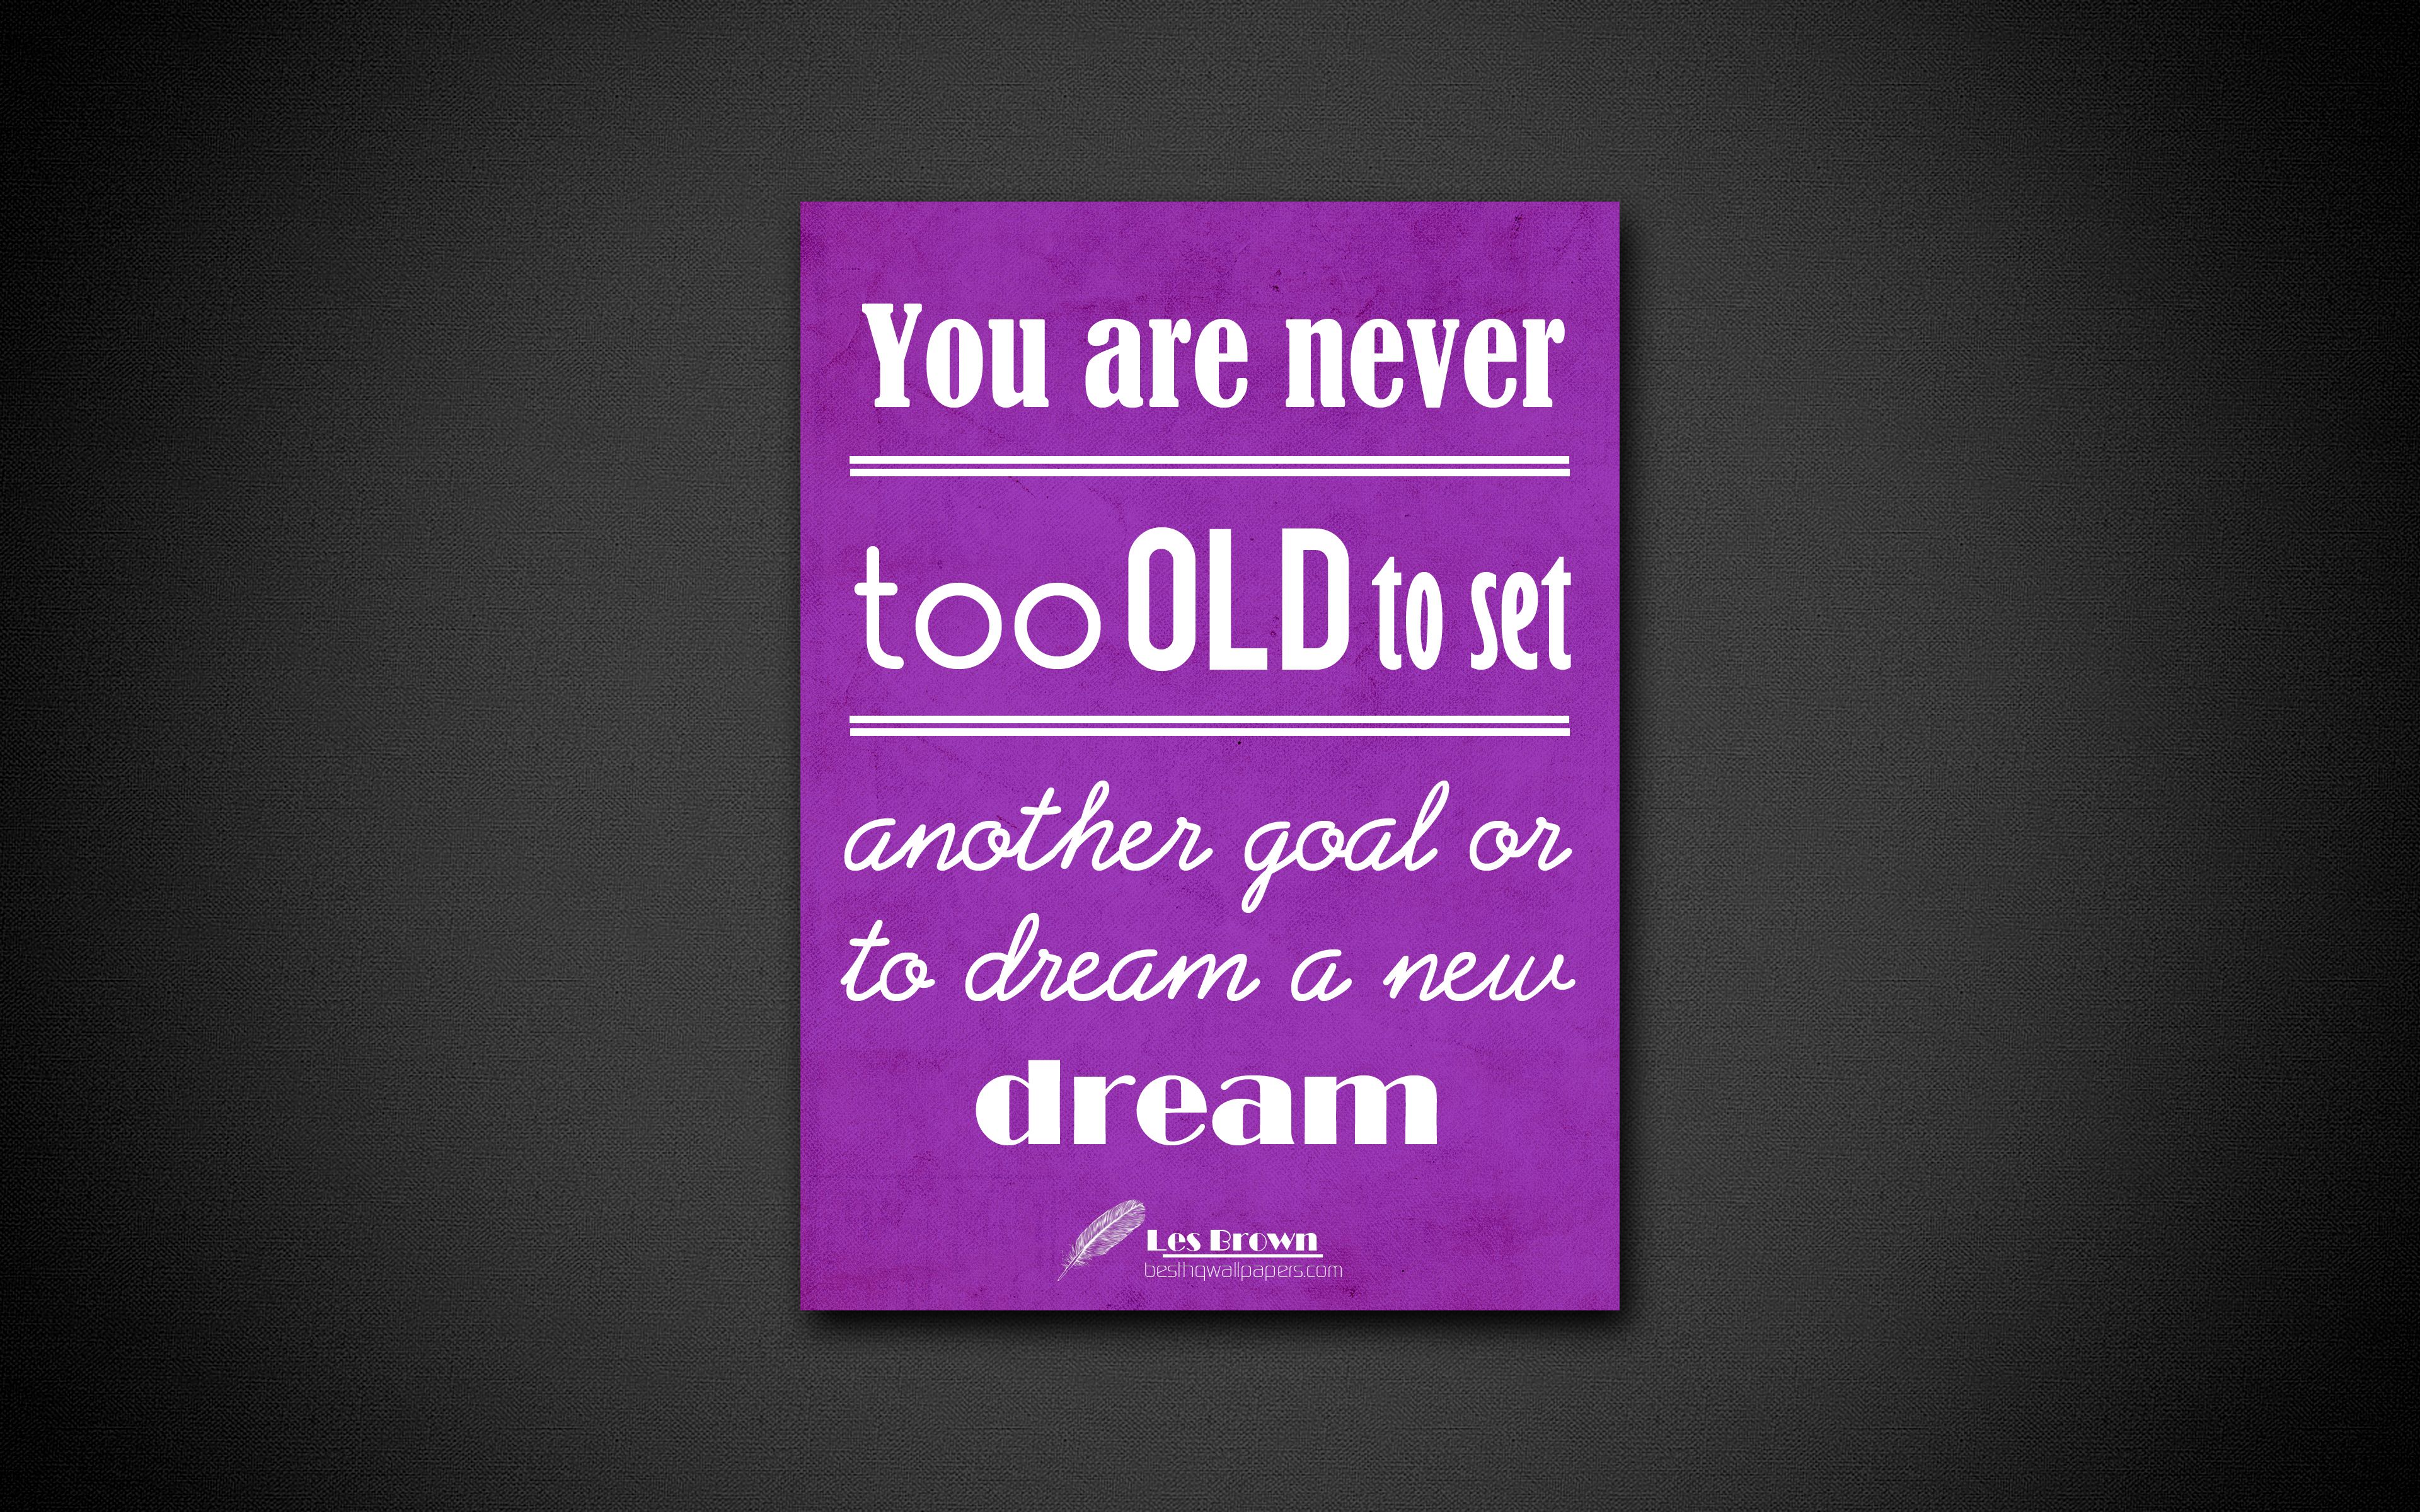 It is never too. You are never too old to Set another goal or to Dream a New Dream 2k aва. Are never to old to. Business quotes. Never too gone tomorrow.